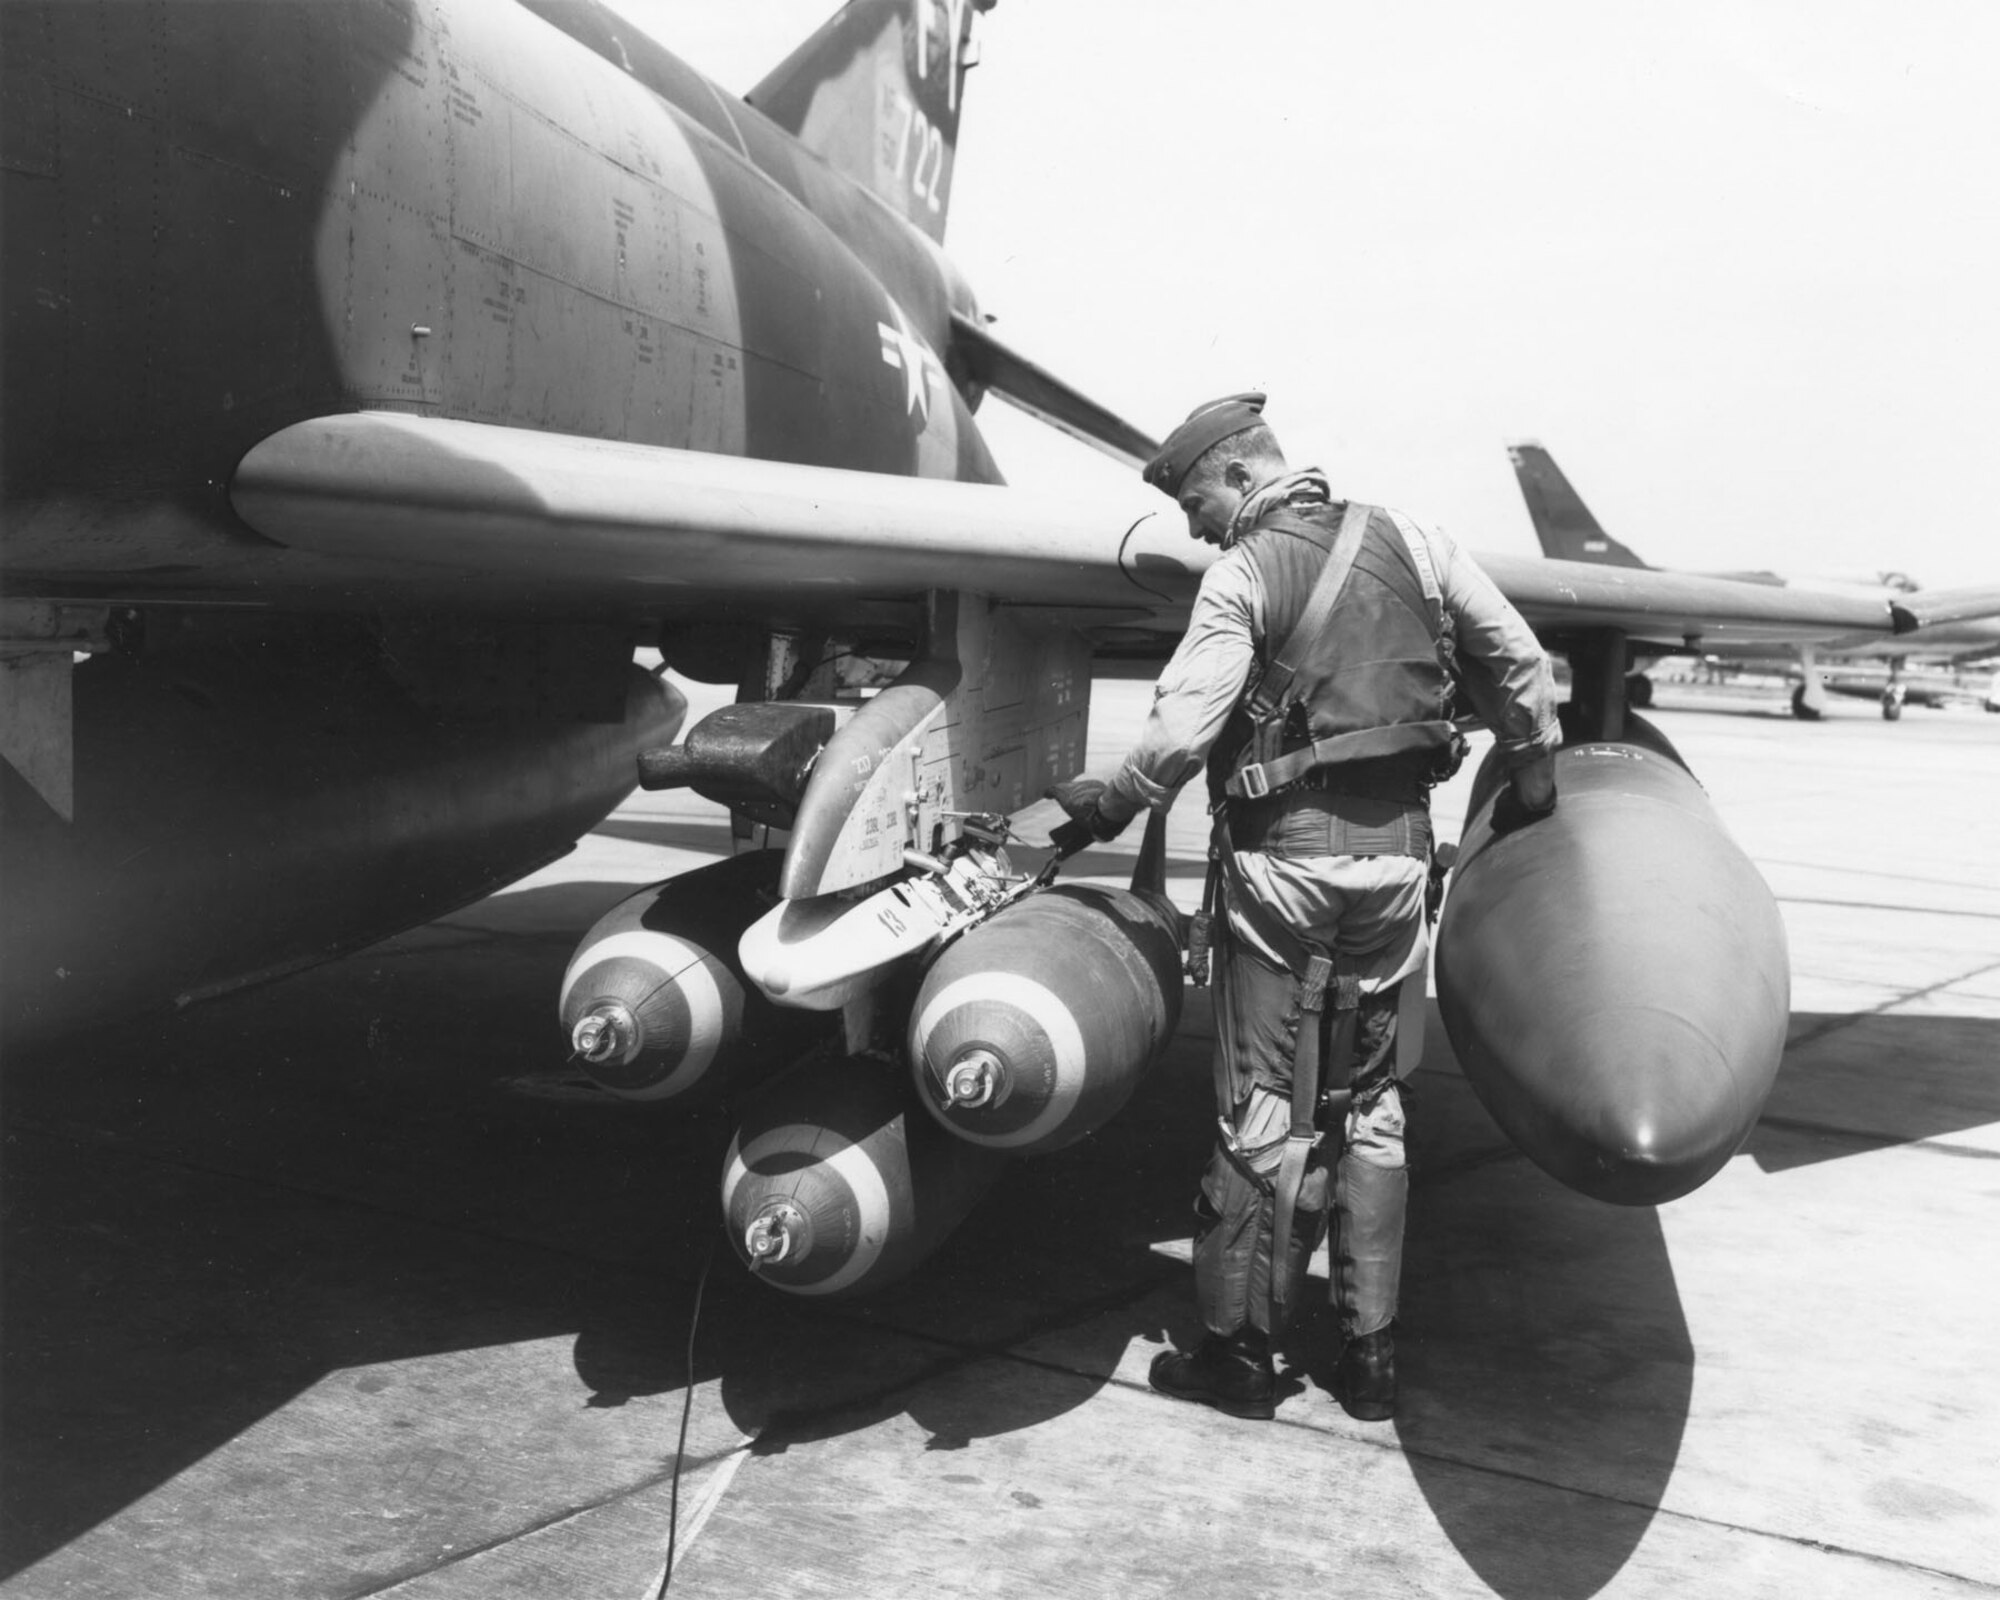 Col. Robin Olds checks his F-4 munitions prior to a mission. (U.S. Air Force photo)